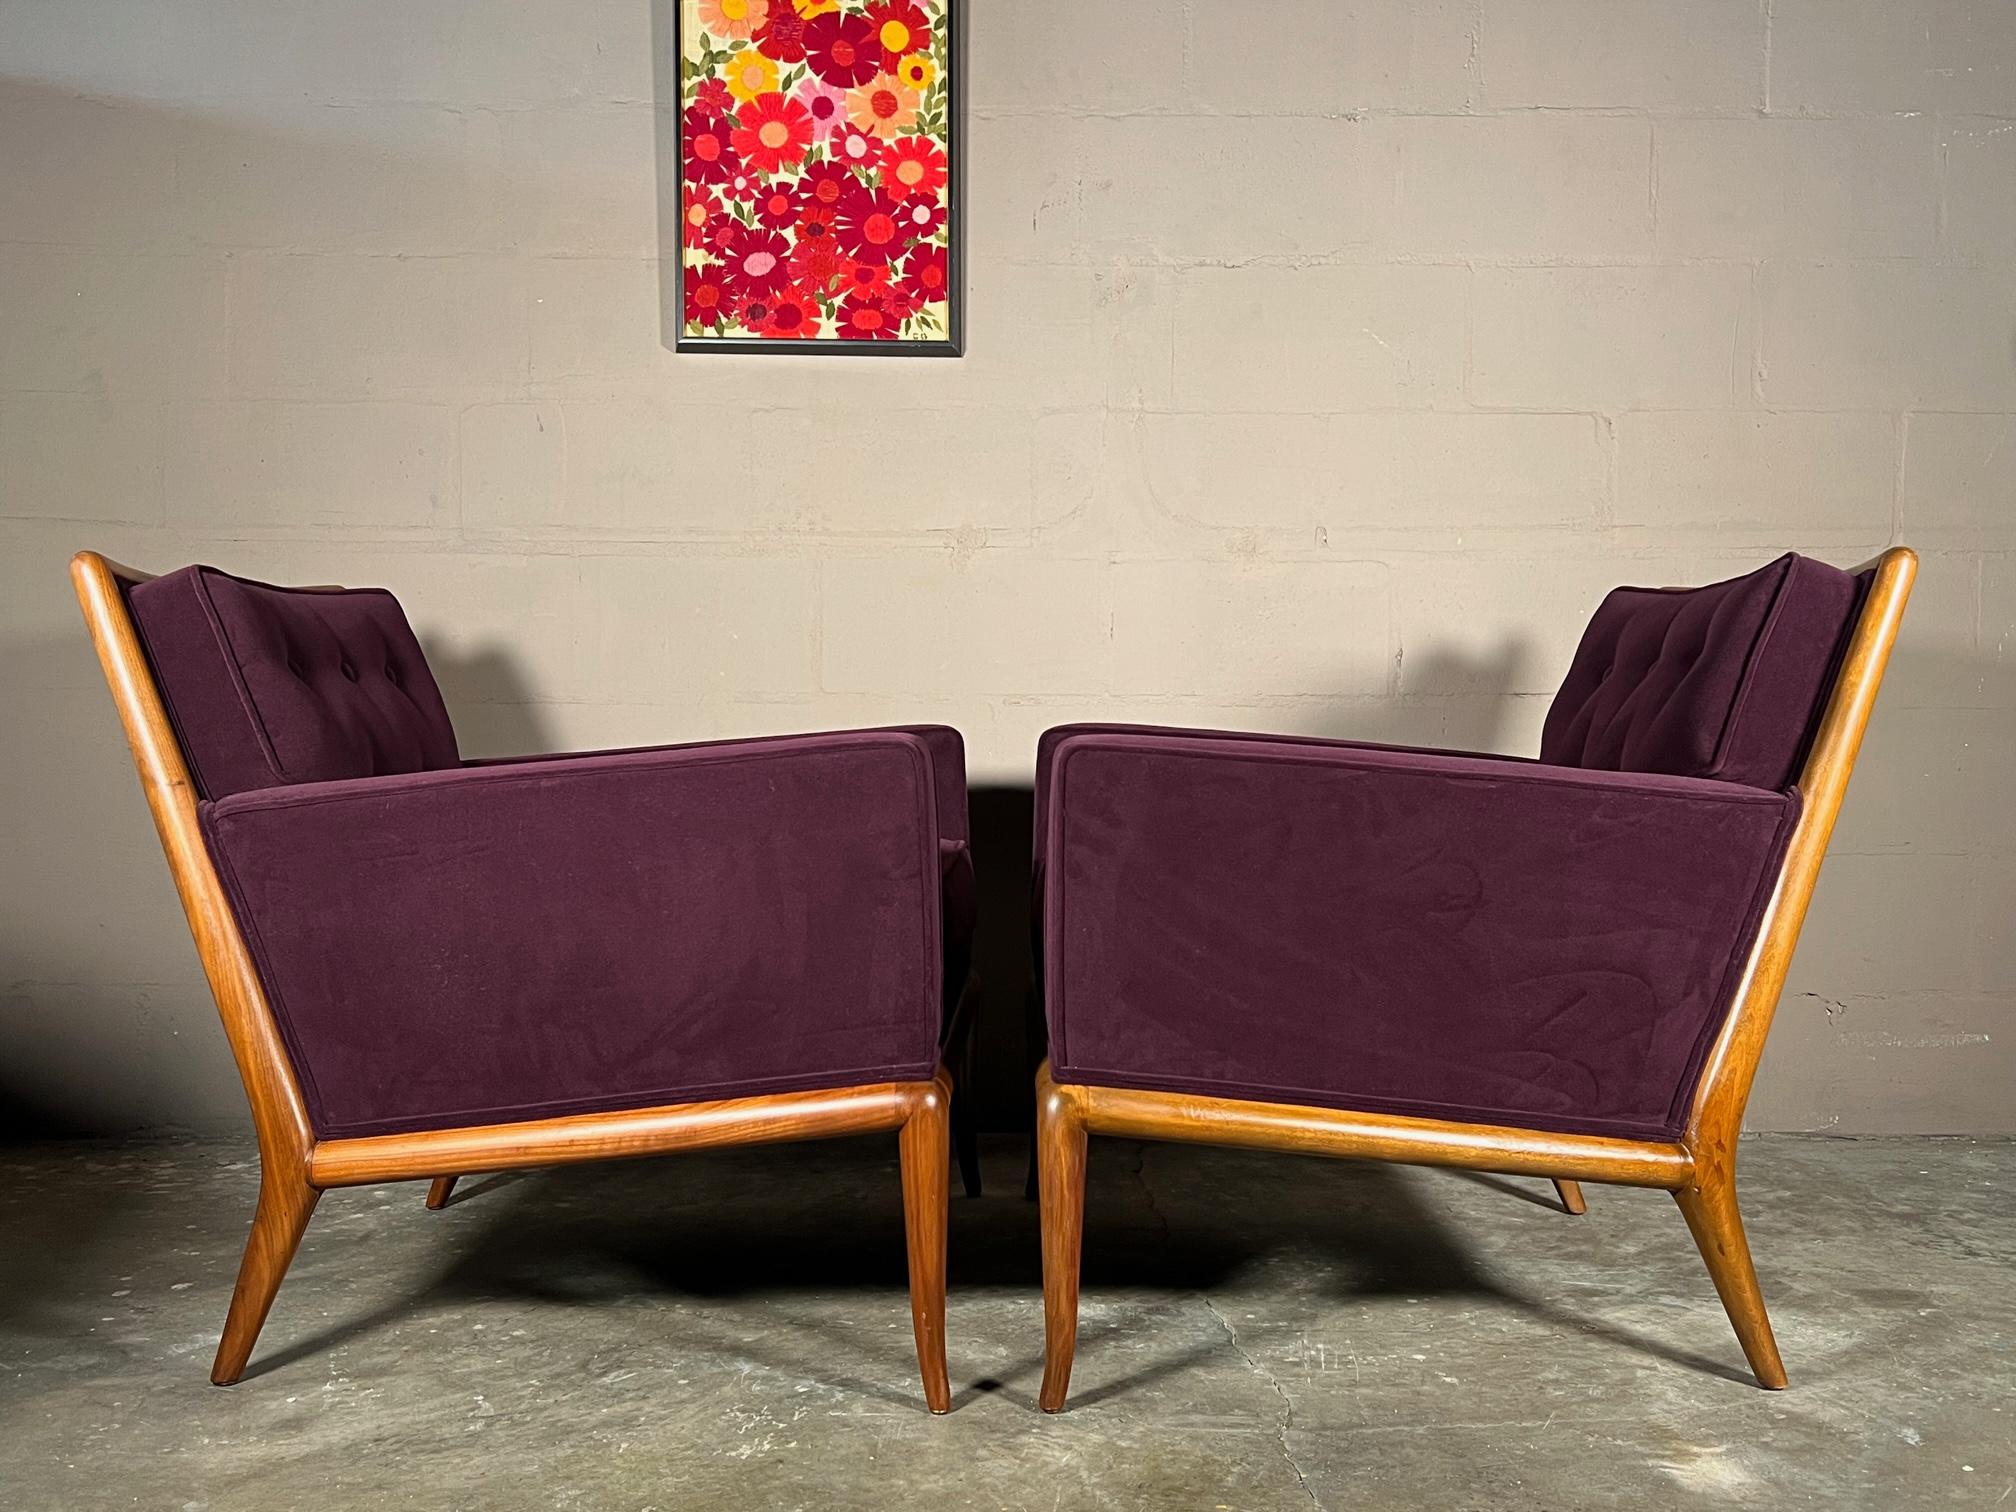 A pair of classic armchairs by T.H.Robsjohn-Gibbings fro Widdicomb, ca' 1950's. Open walnut frames, reupholstered.